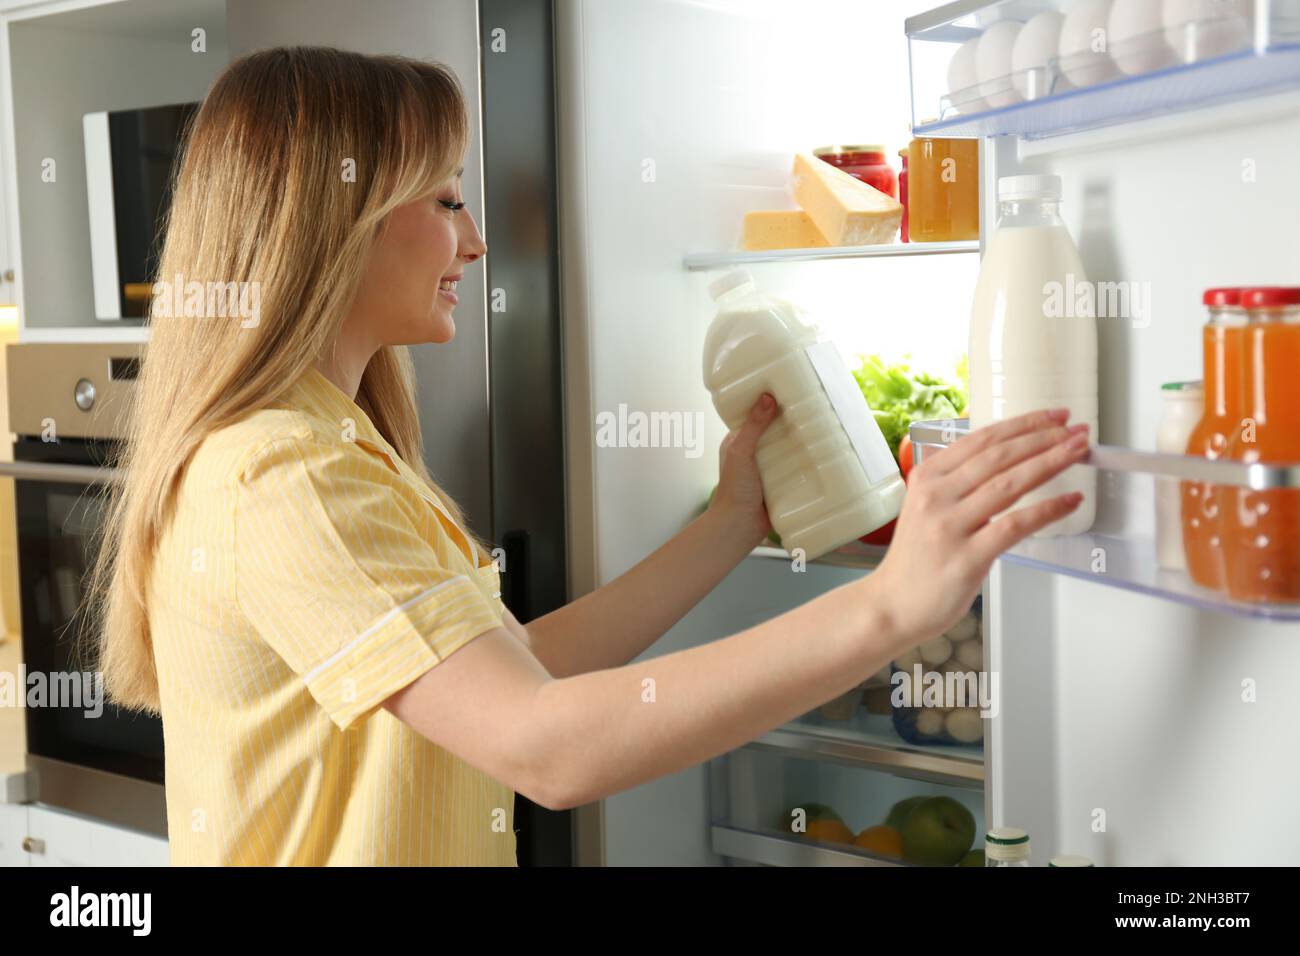 https://c8.alamy.com/comp/2NH3BT7/young-woman-putting-gallon-of-milk-into-refrigerator-in-kitchen-2NH3BT7.jpg